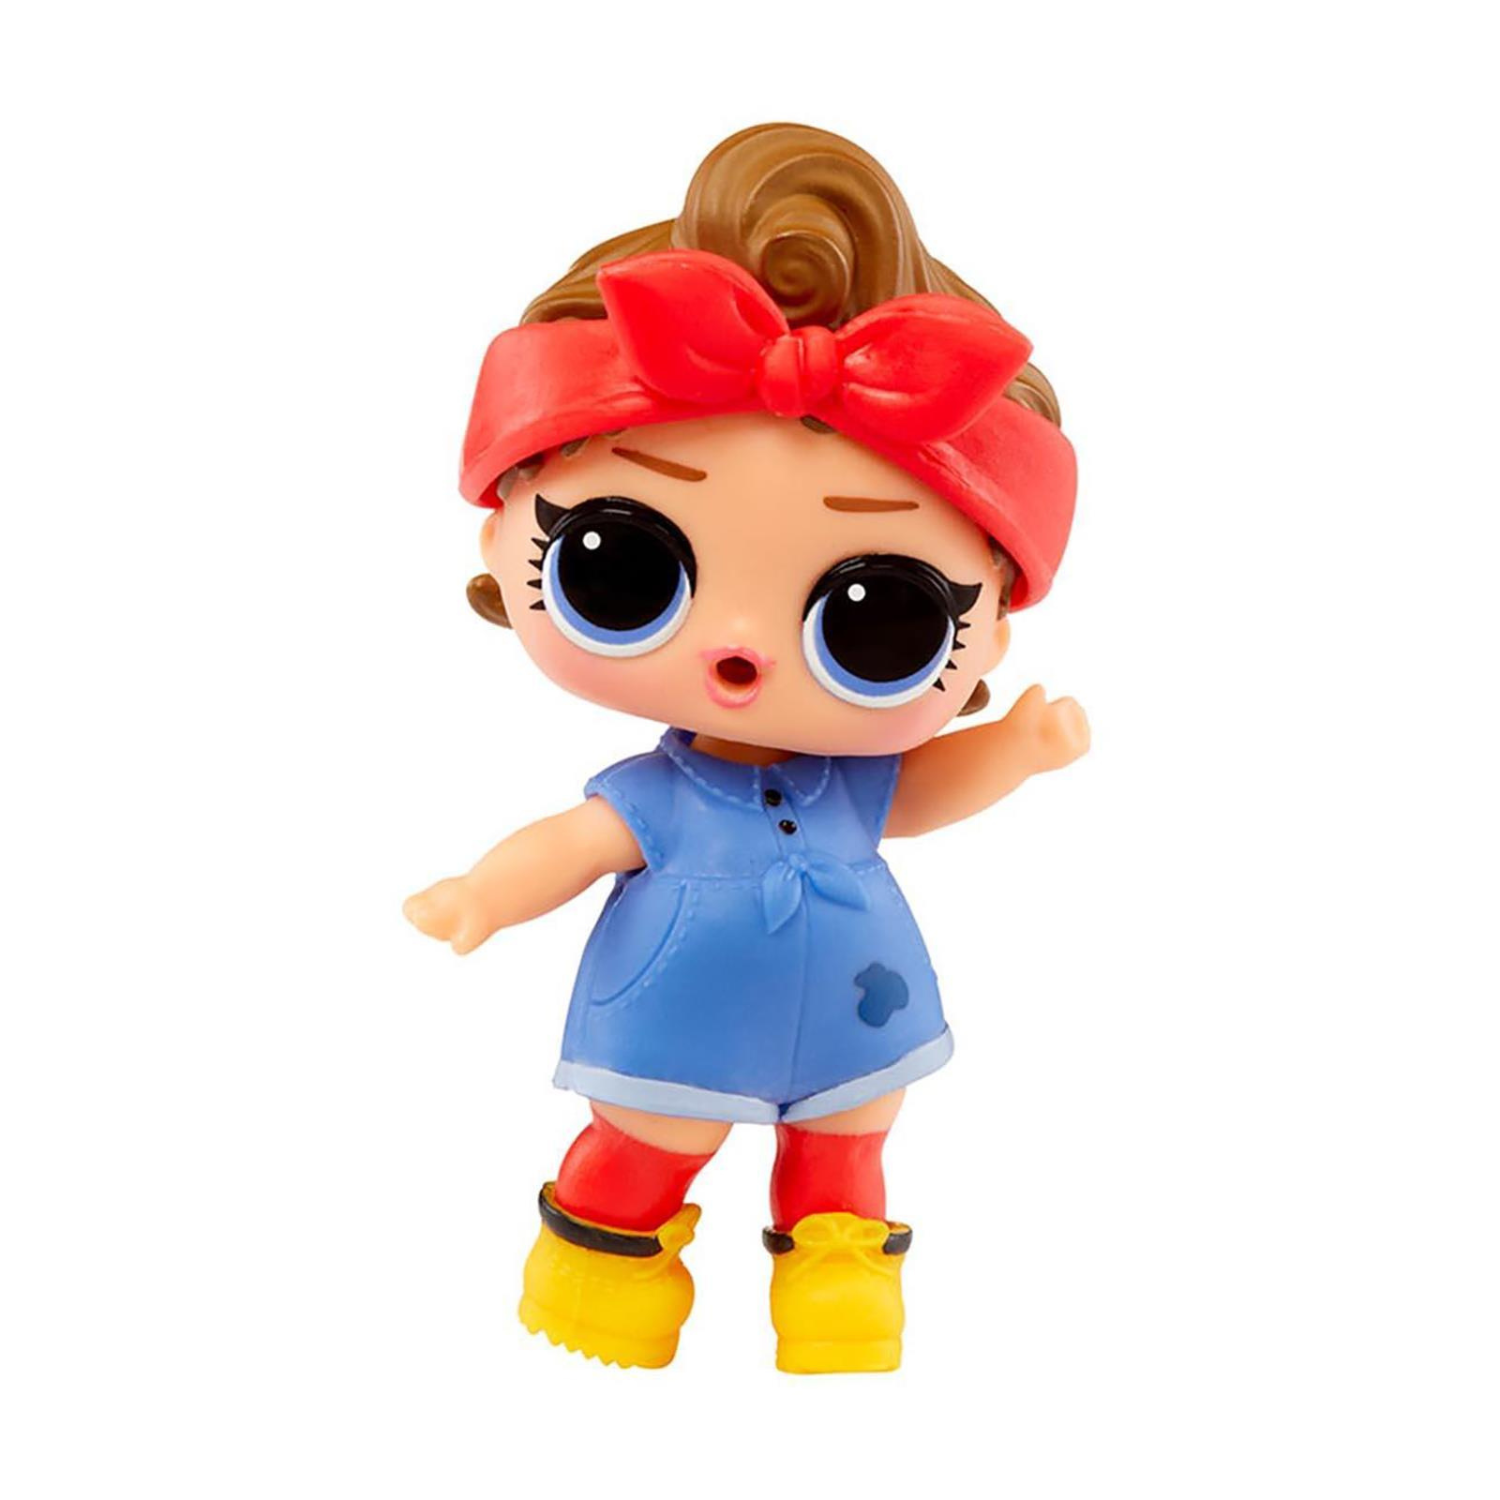 L.O.L. Surprise OPP Tots Bebeği - Can Do Baby 987345 | Toysall